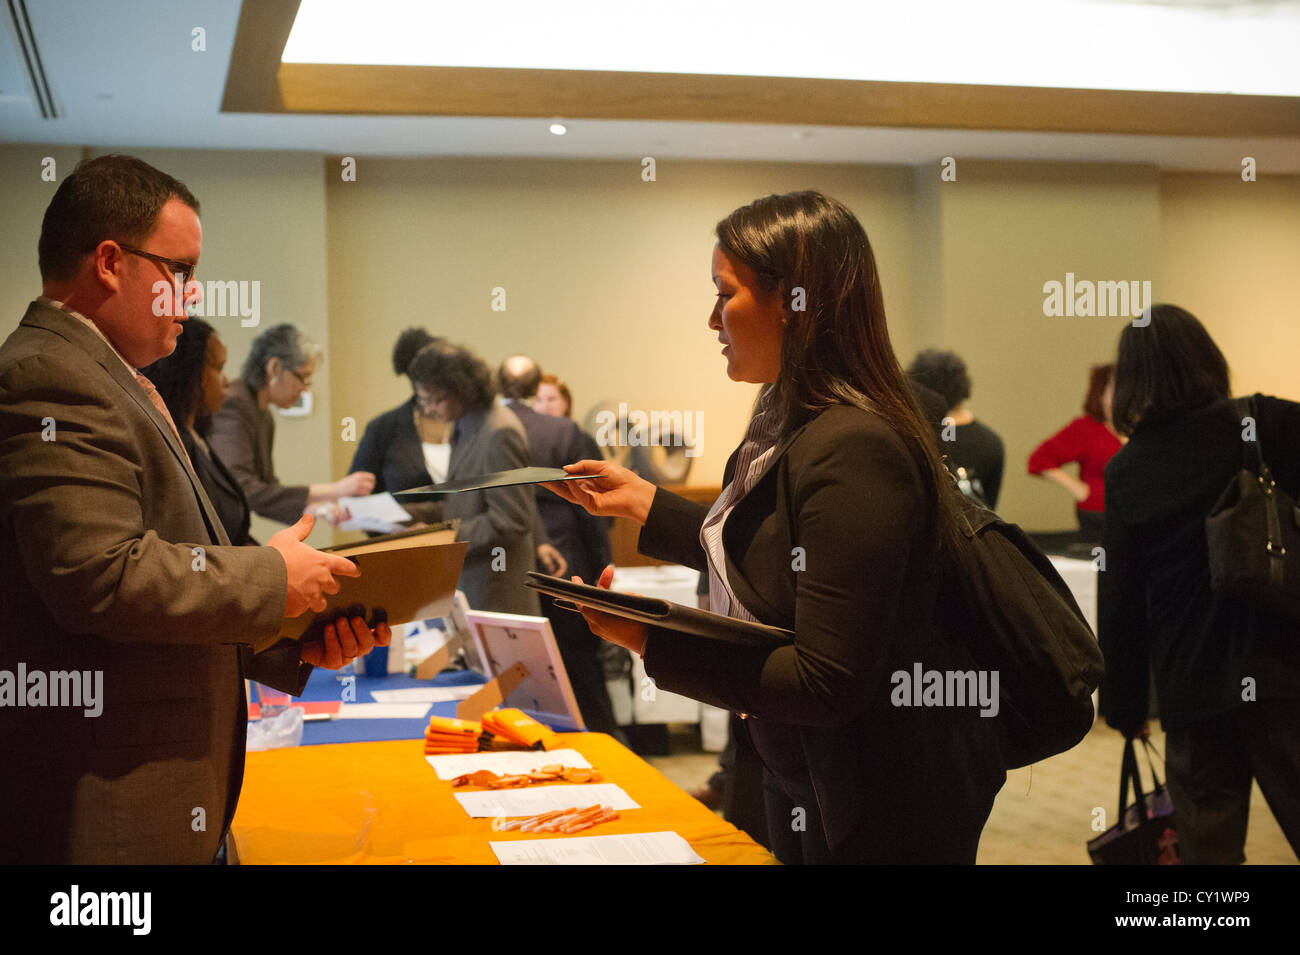 Job seekers attend a job fair at midtown in New York Stock Photo